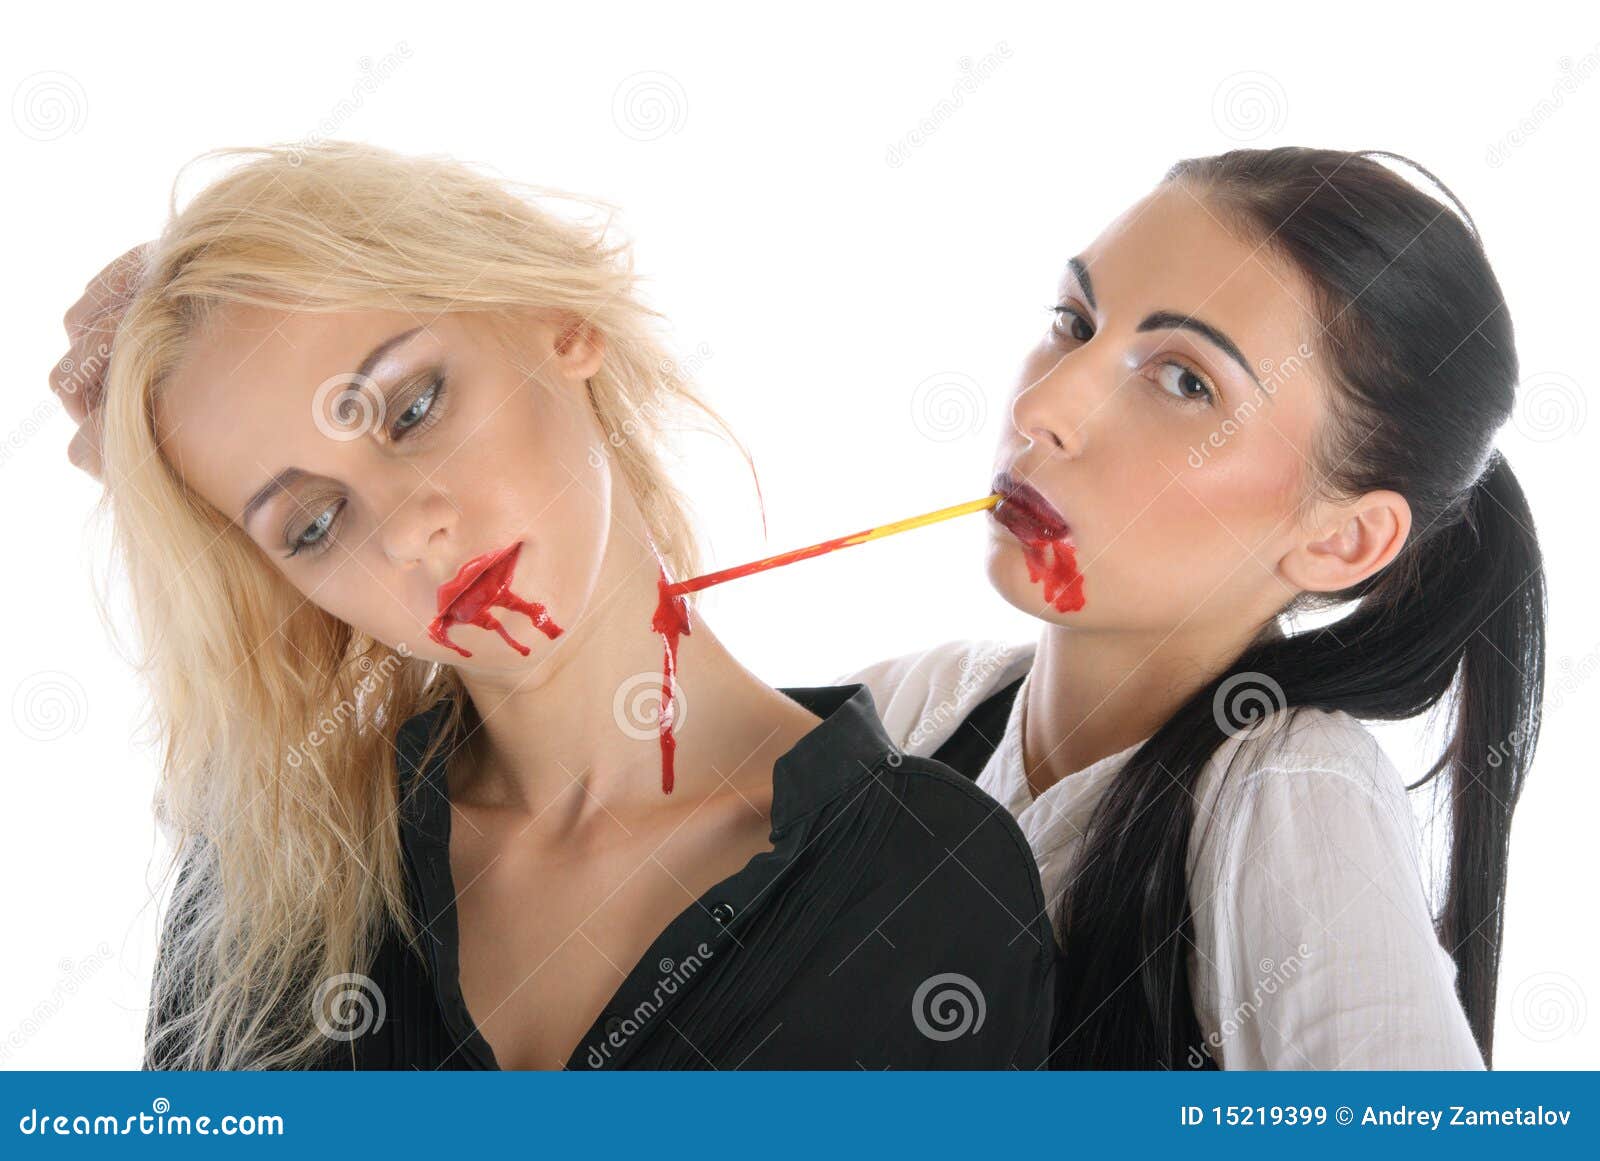 Woman Sucks Blood From Neck Of Other Woman Royalty Free